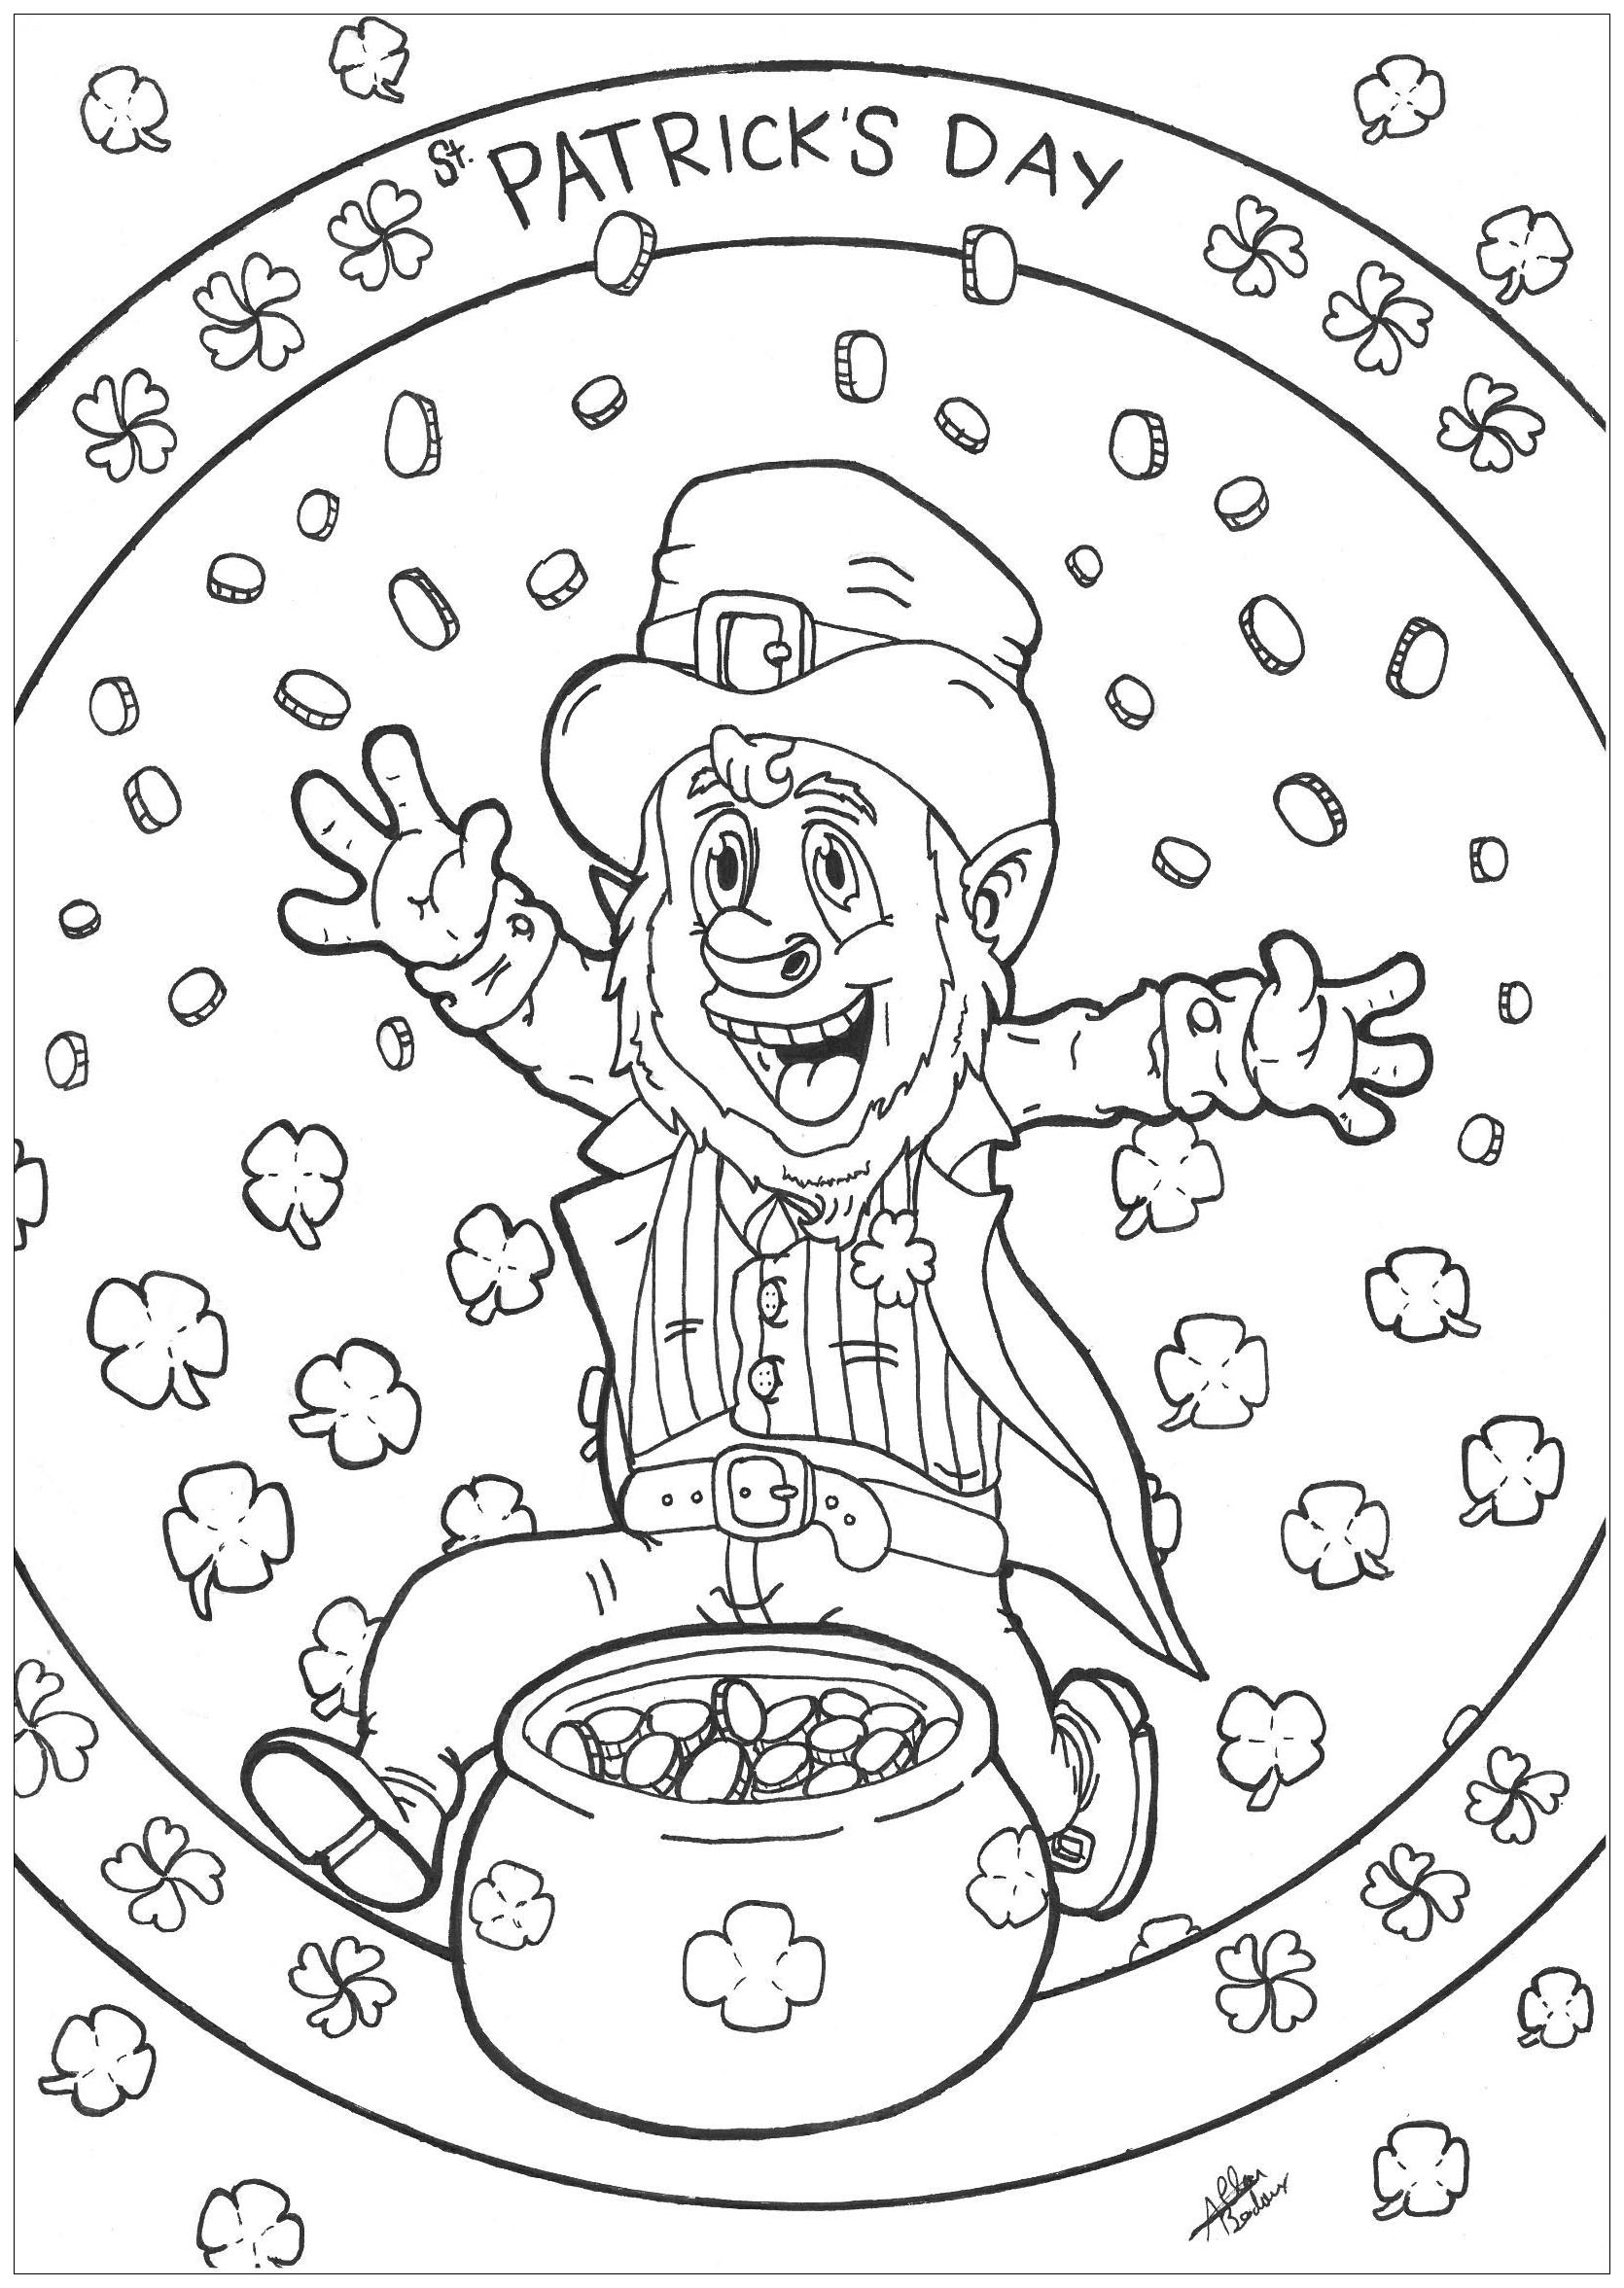 Leprechaun Patrick Day St Patrick s Day Adult Coloring Pages